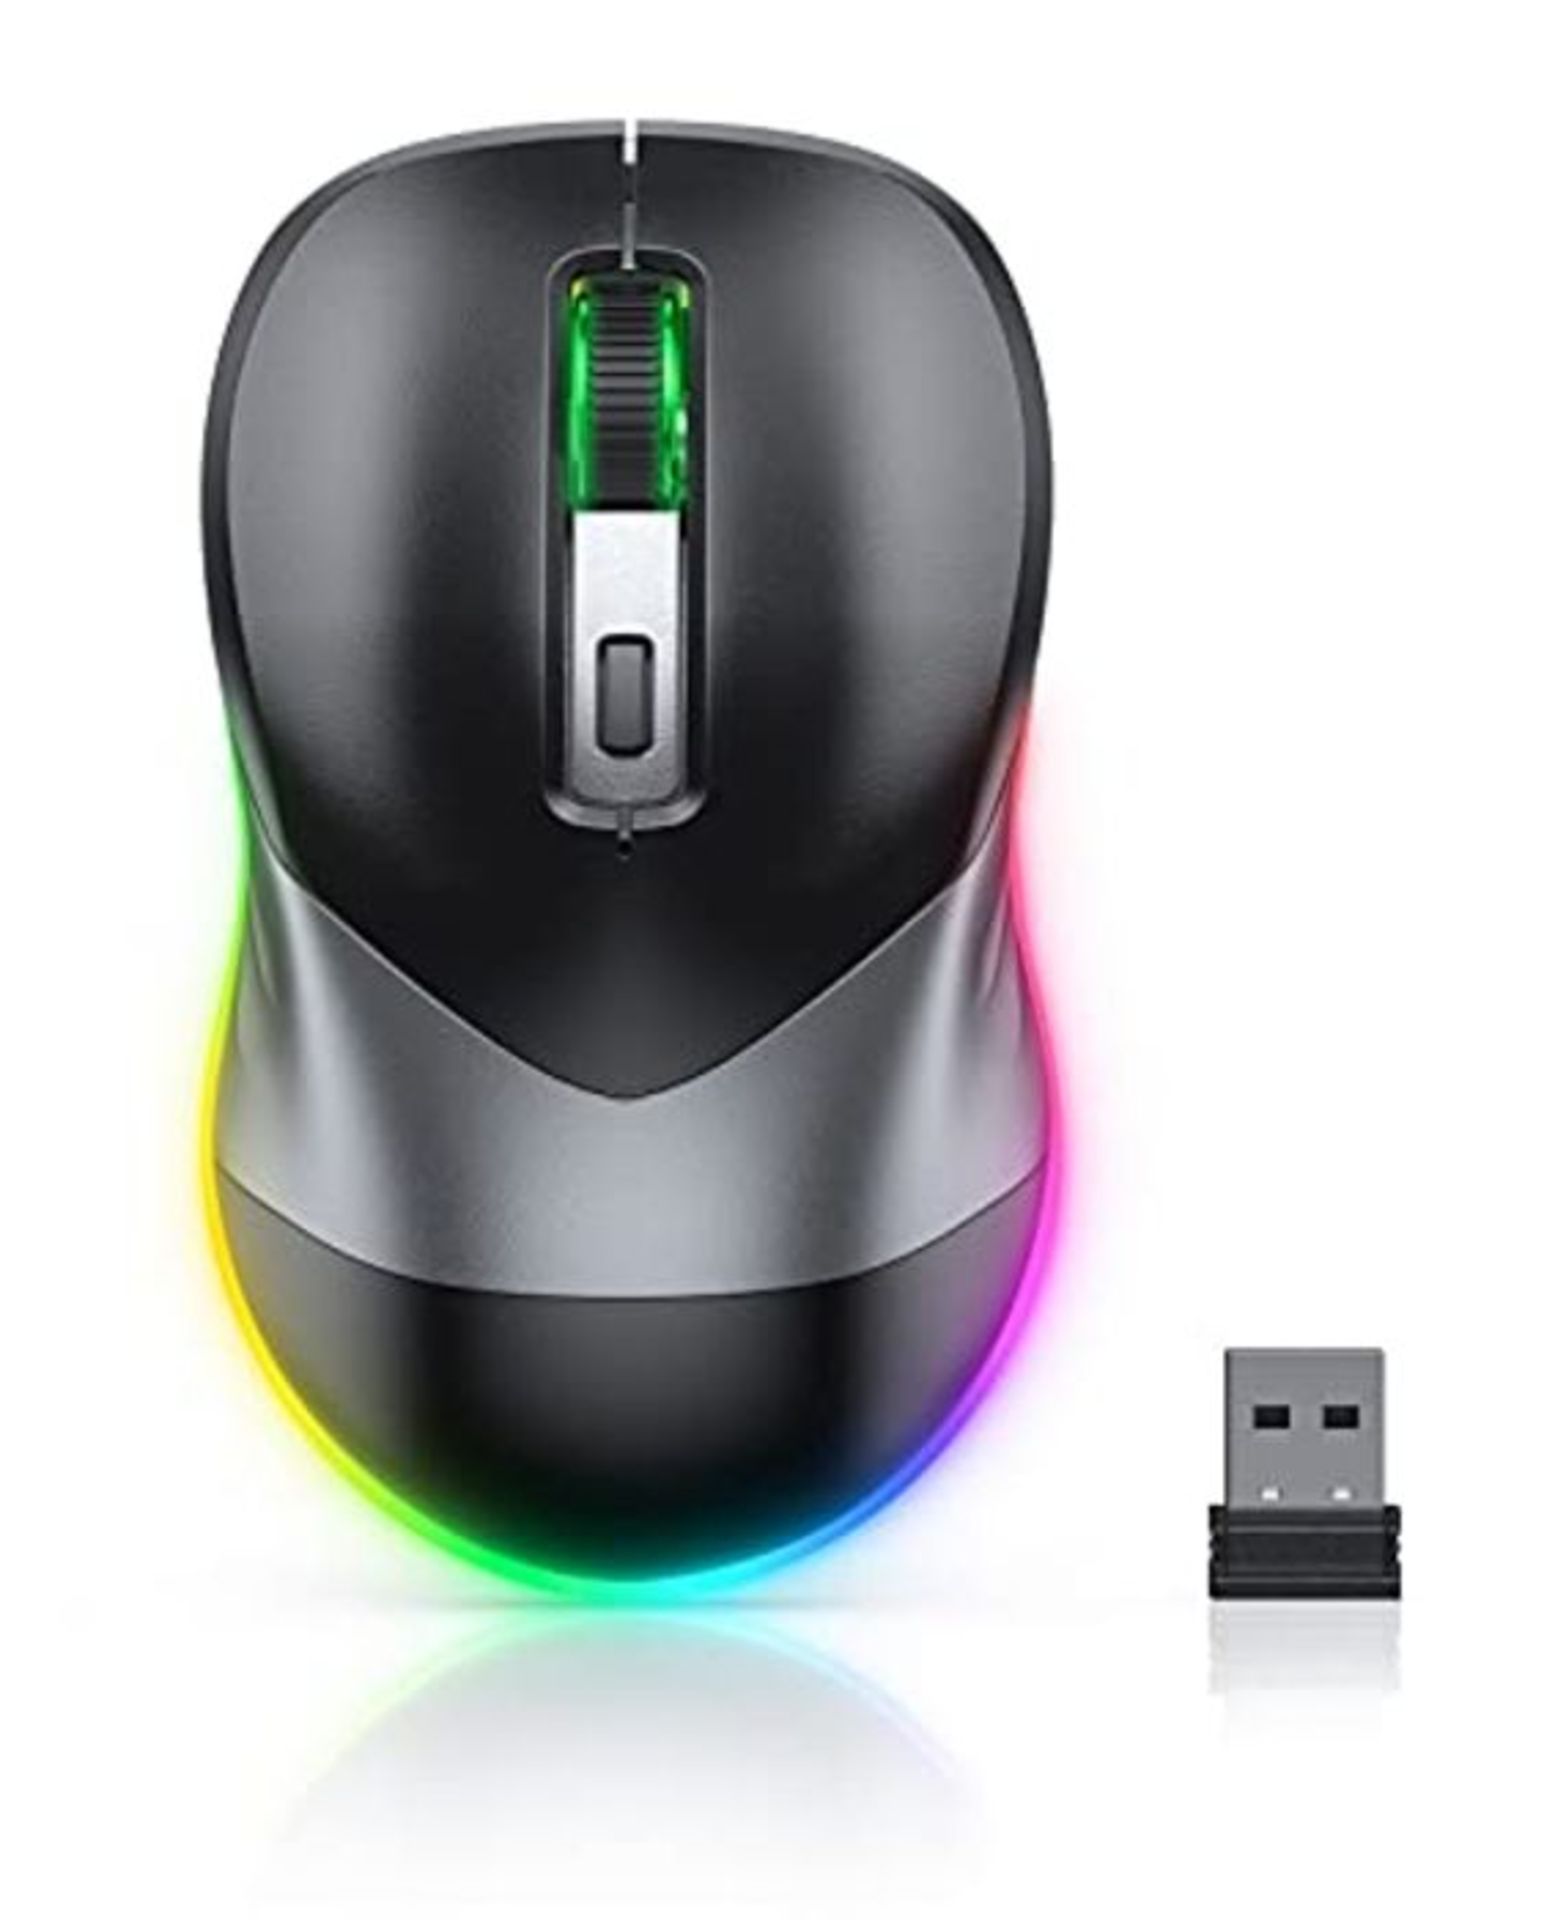 MagoFeliz 2.4G Rechargeable LED Wireless Mouse, Jiggler Mode, Wireless Mouse Jiggler/M